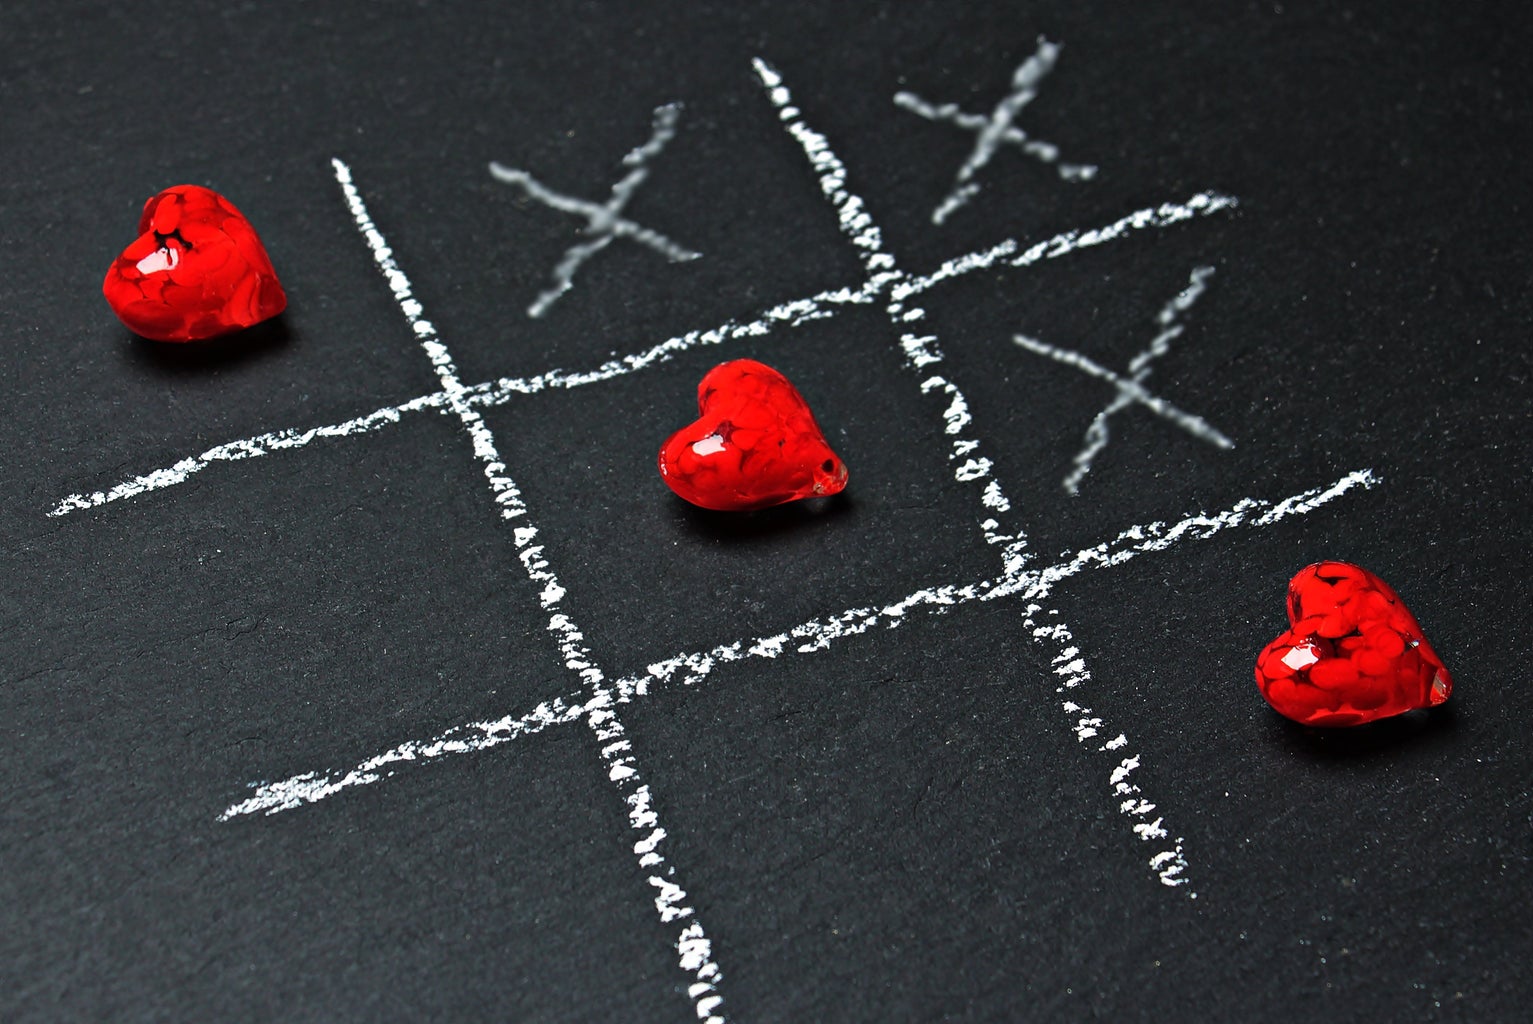 tic-tac-toe game with hearts